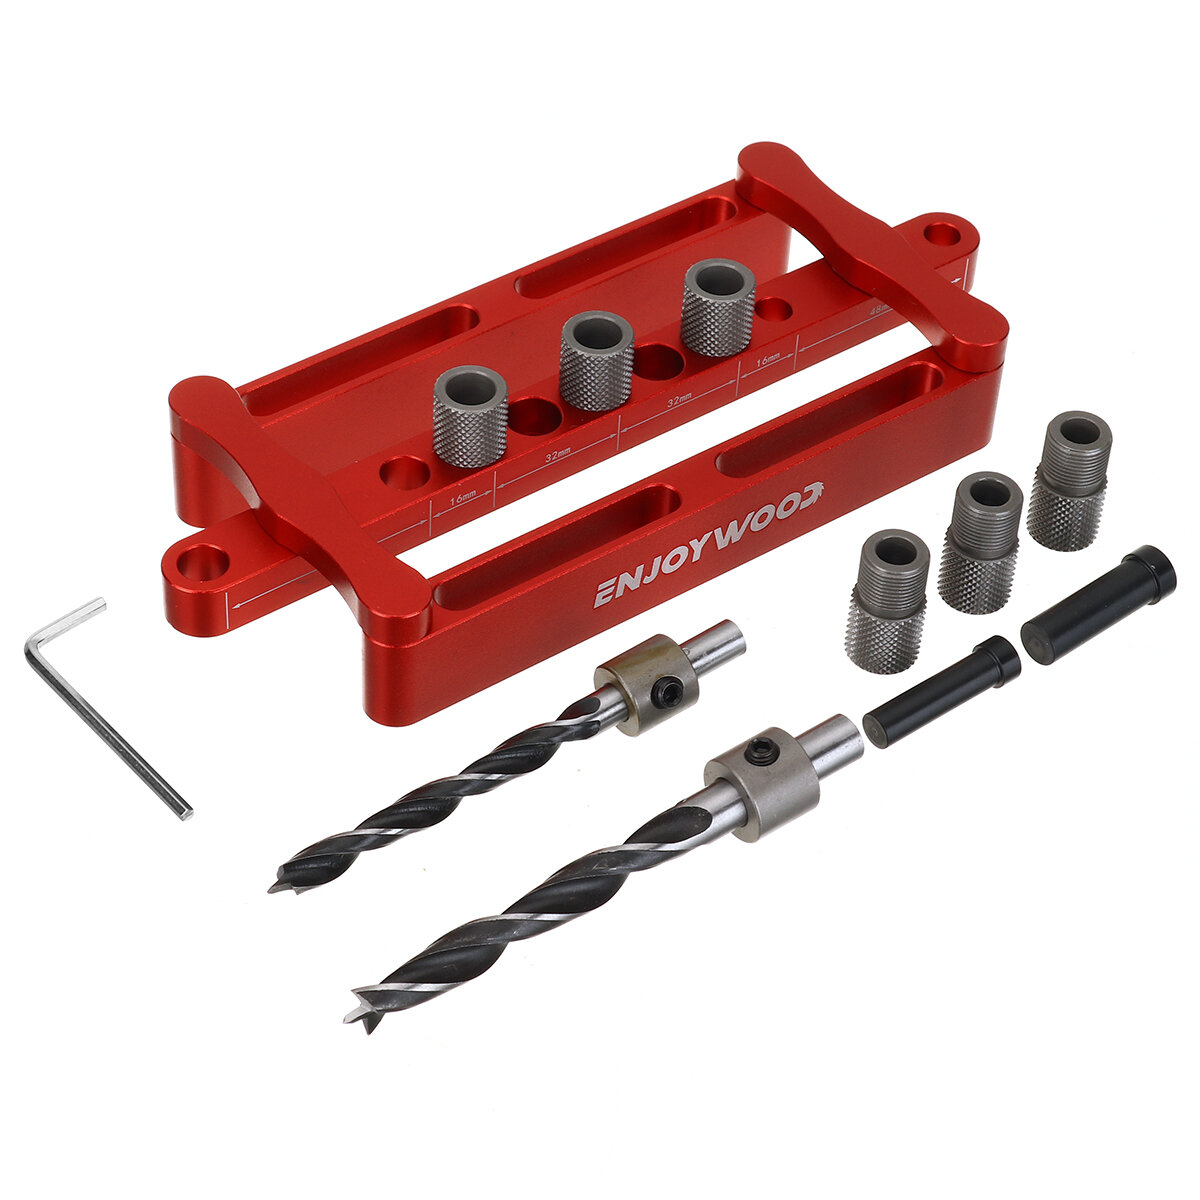 ENJOYWOOD X320 Self Centering Dowelling Jig Metric Inch Dowel Punch Locator Drilling Tools for Woodw